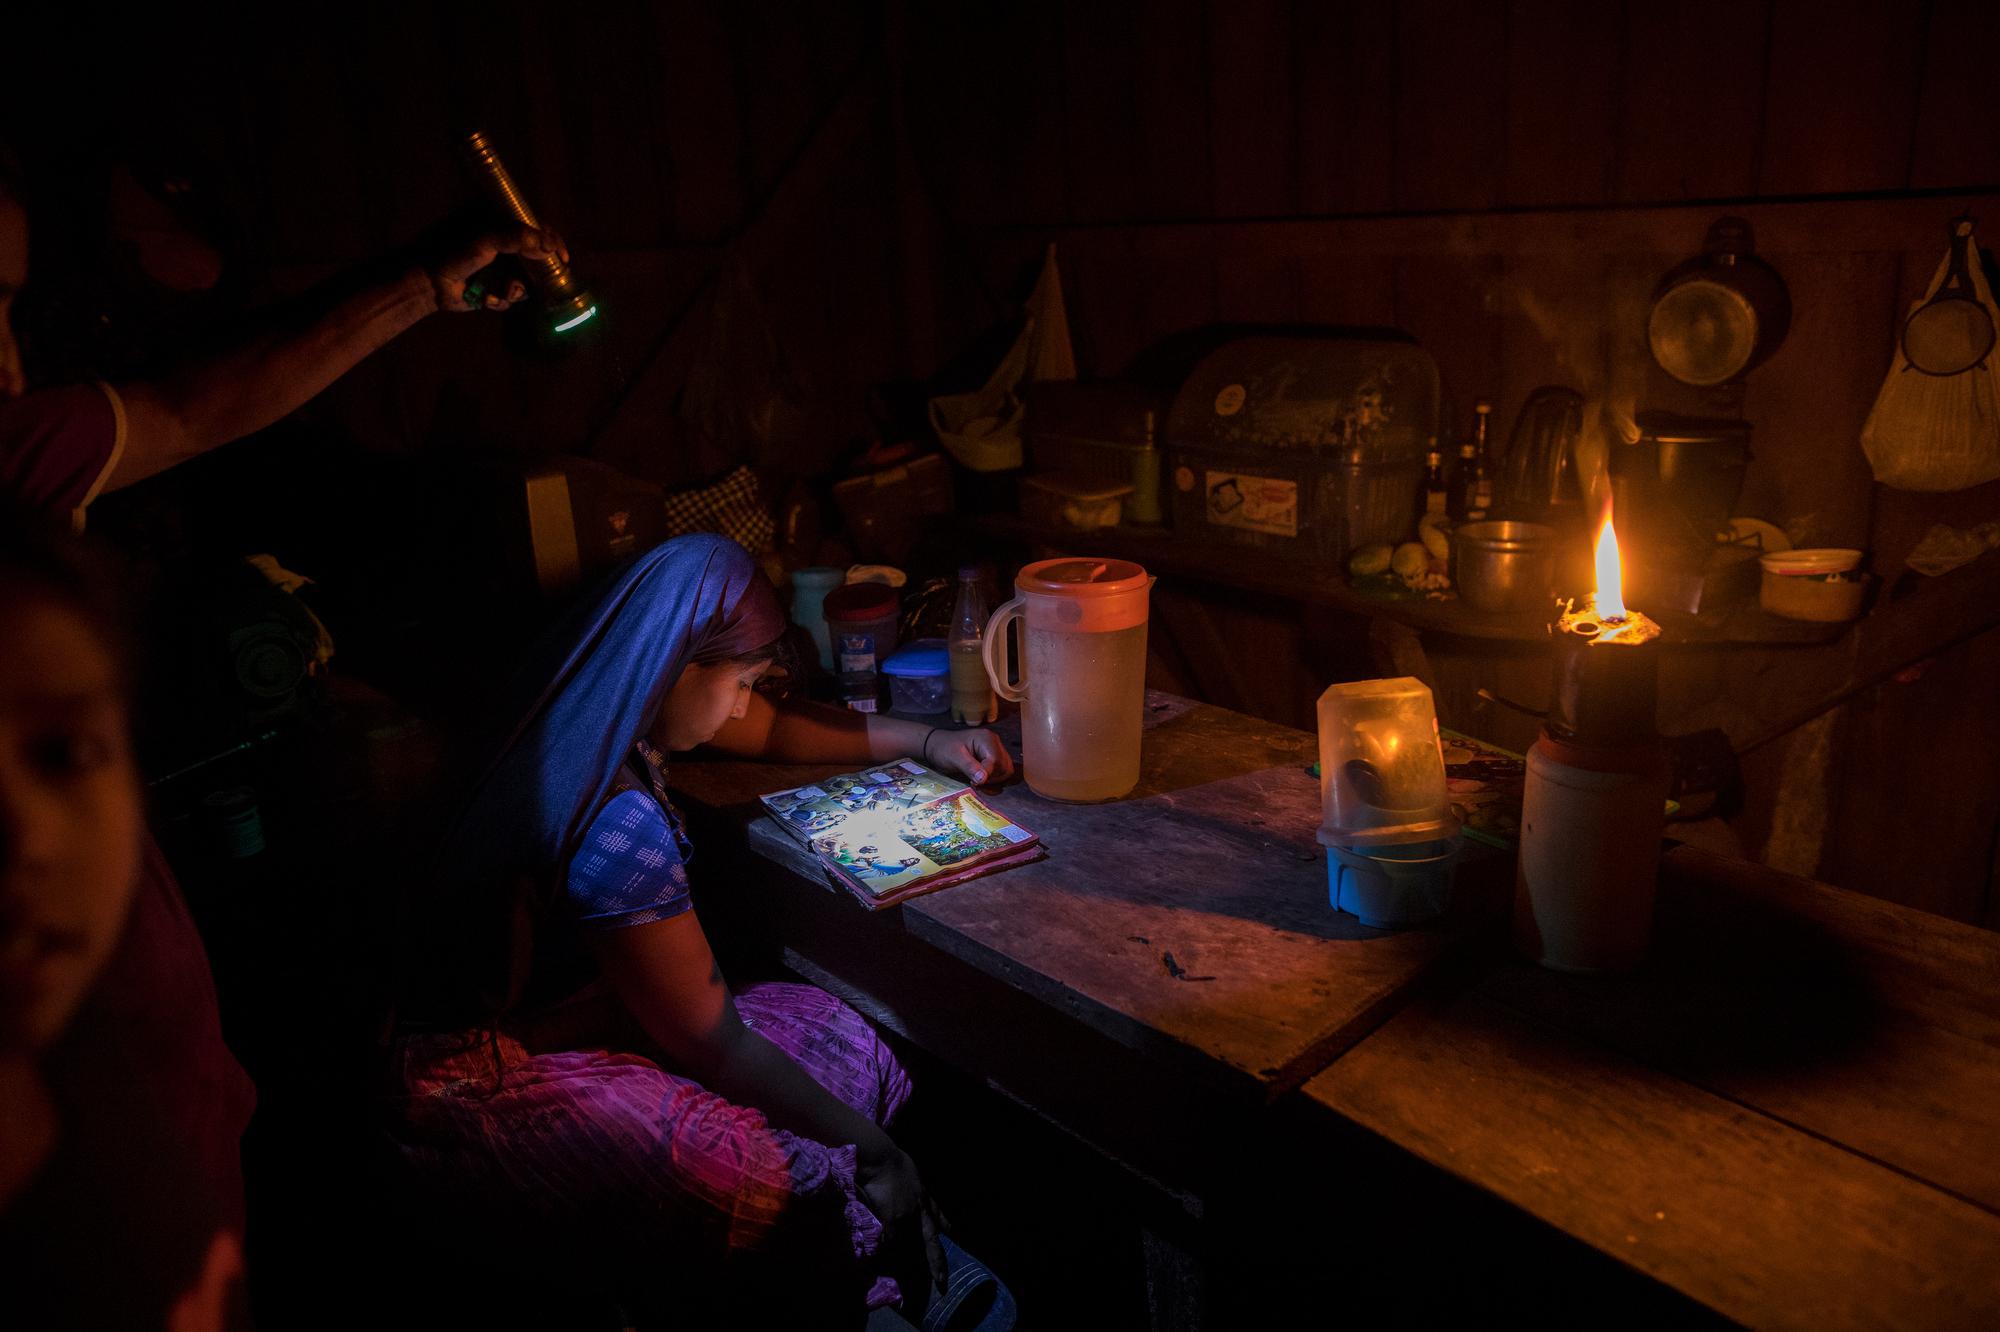 With the aid of a flashlight and a kerosene flame, 12-year-old Zairi Olivia, a member of the evangelical Christian sect Israelites of the New Universal Pact, looks at The Children's Illustrated Bible in her house in Jose Carlos Mariategui, Peru, a village in the Amazon rainforest, on March 31, 2021. (AP Photo/Rodrigo Abd)